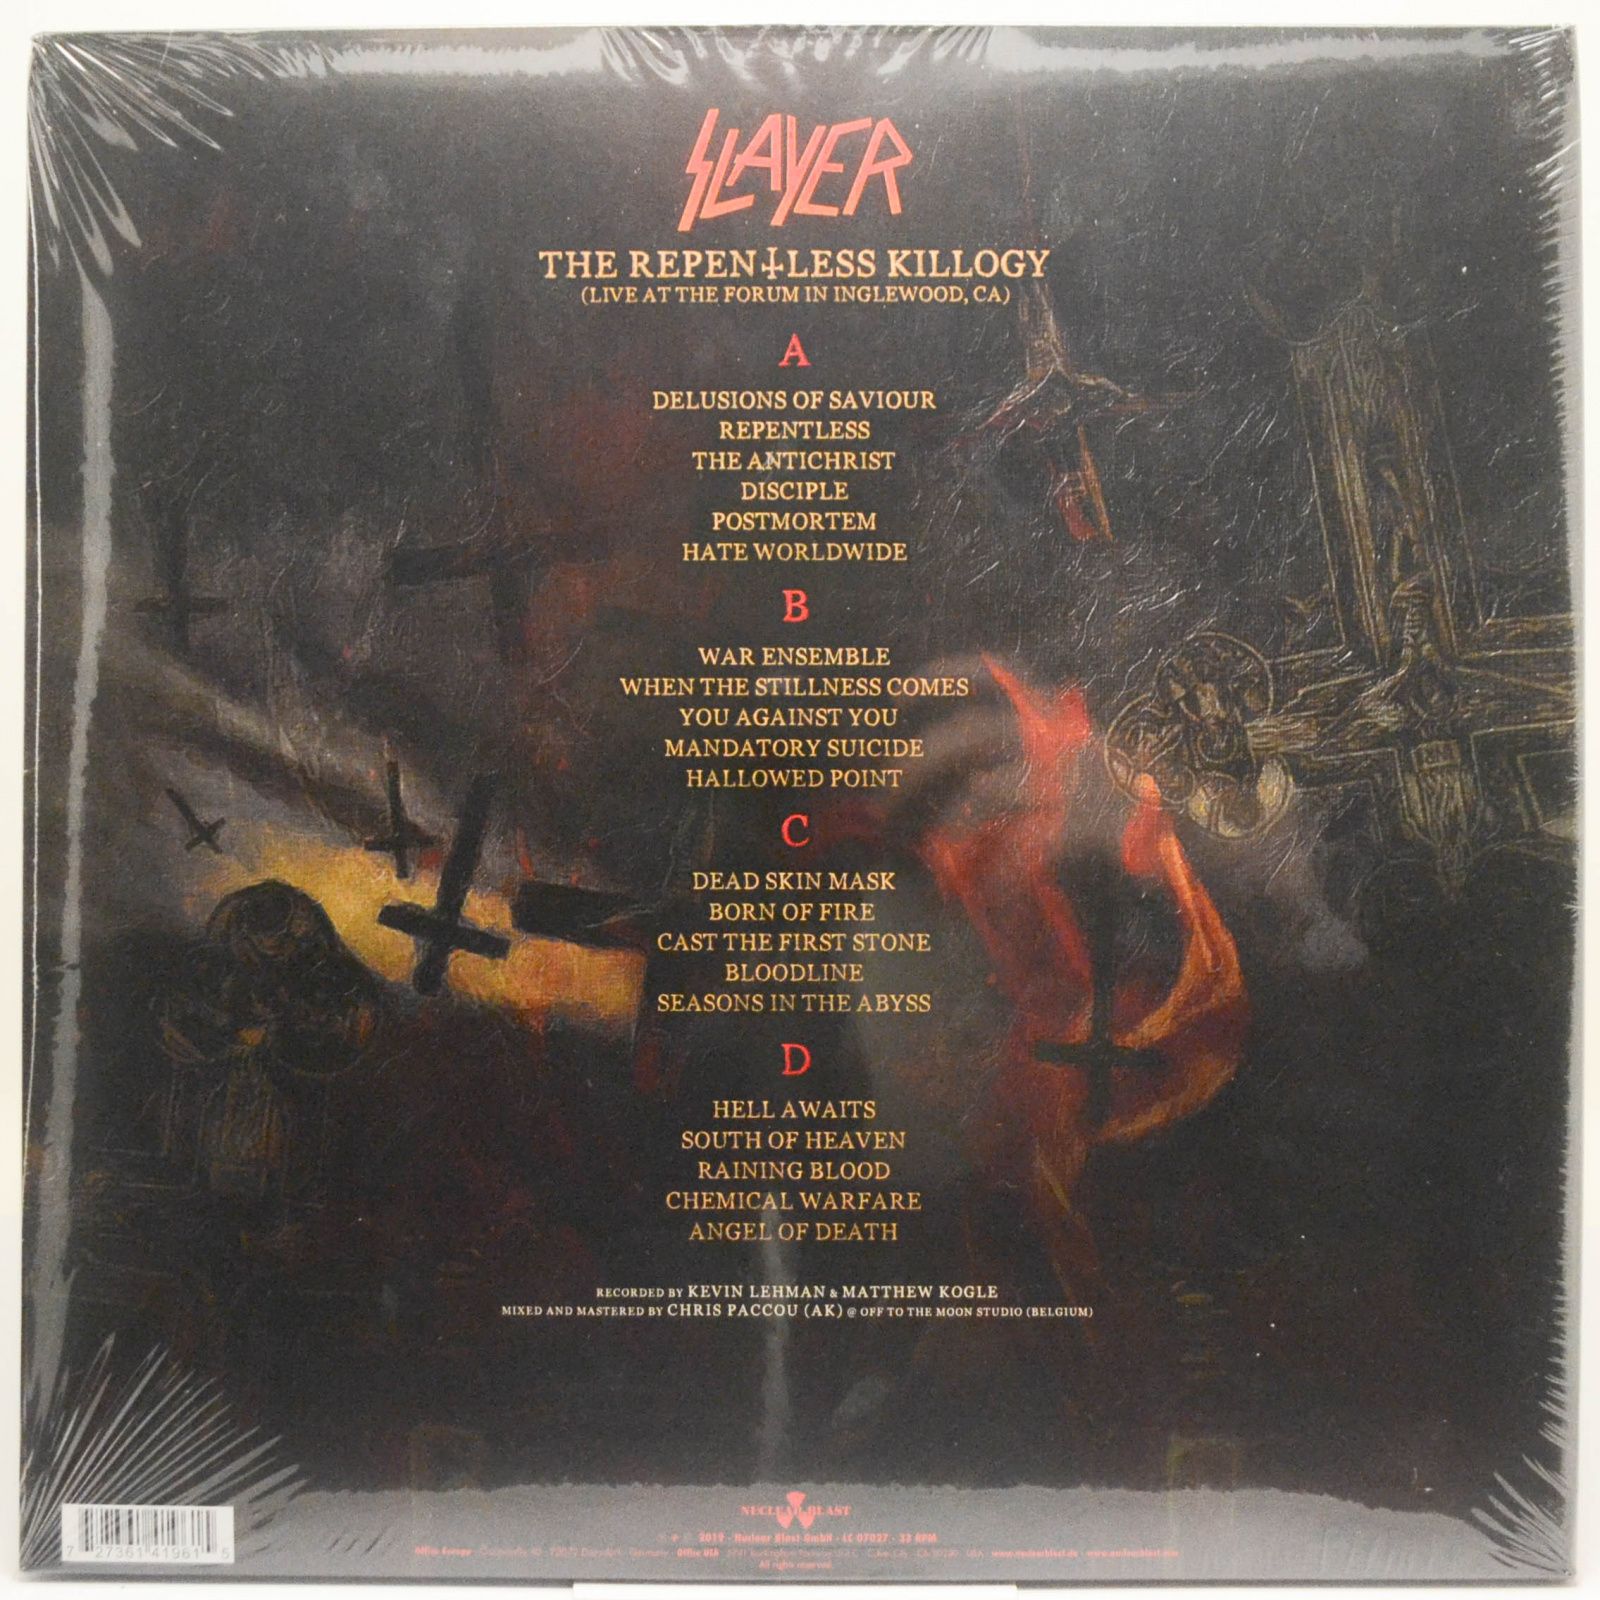 Slayer — The Repentless Killogy (Live At The Forum In Inglewood, CA), 2019